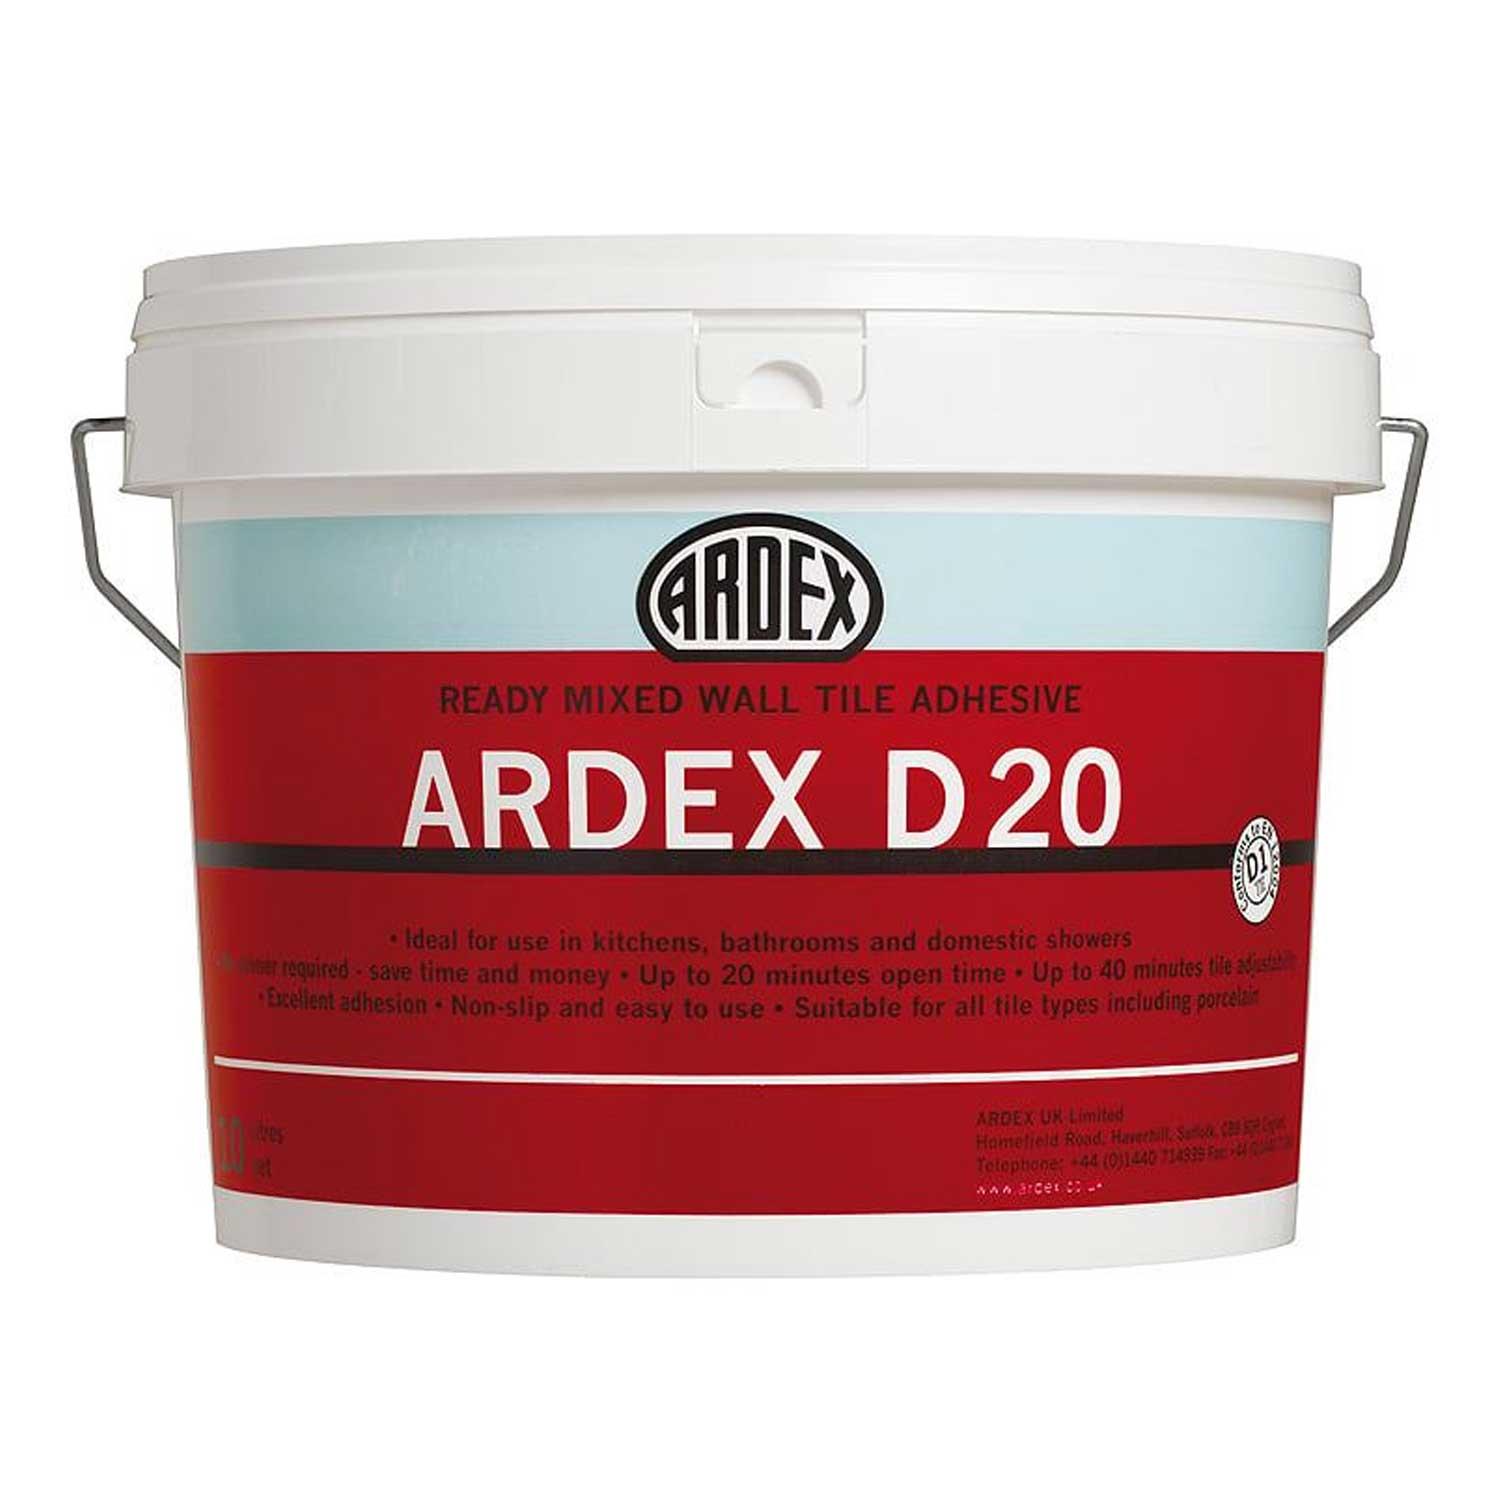 Ardex D20 Ready Mixed Wall Tile Adhesive 10 Ltr